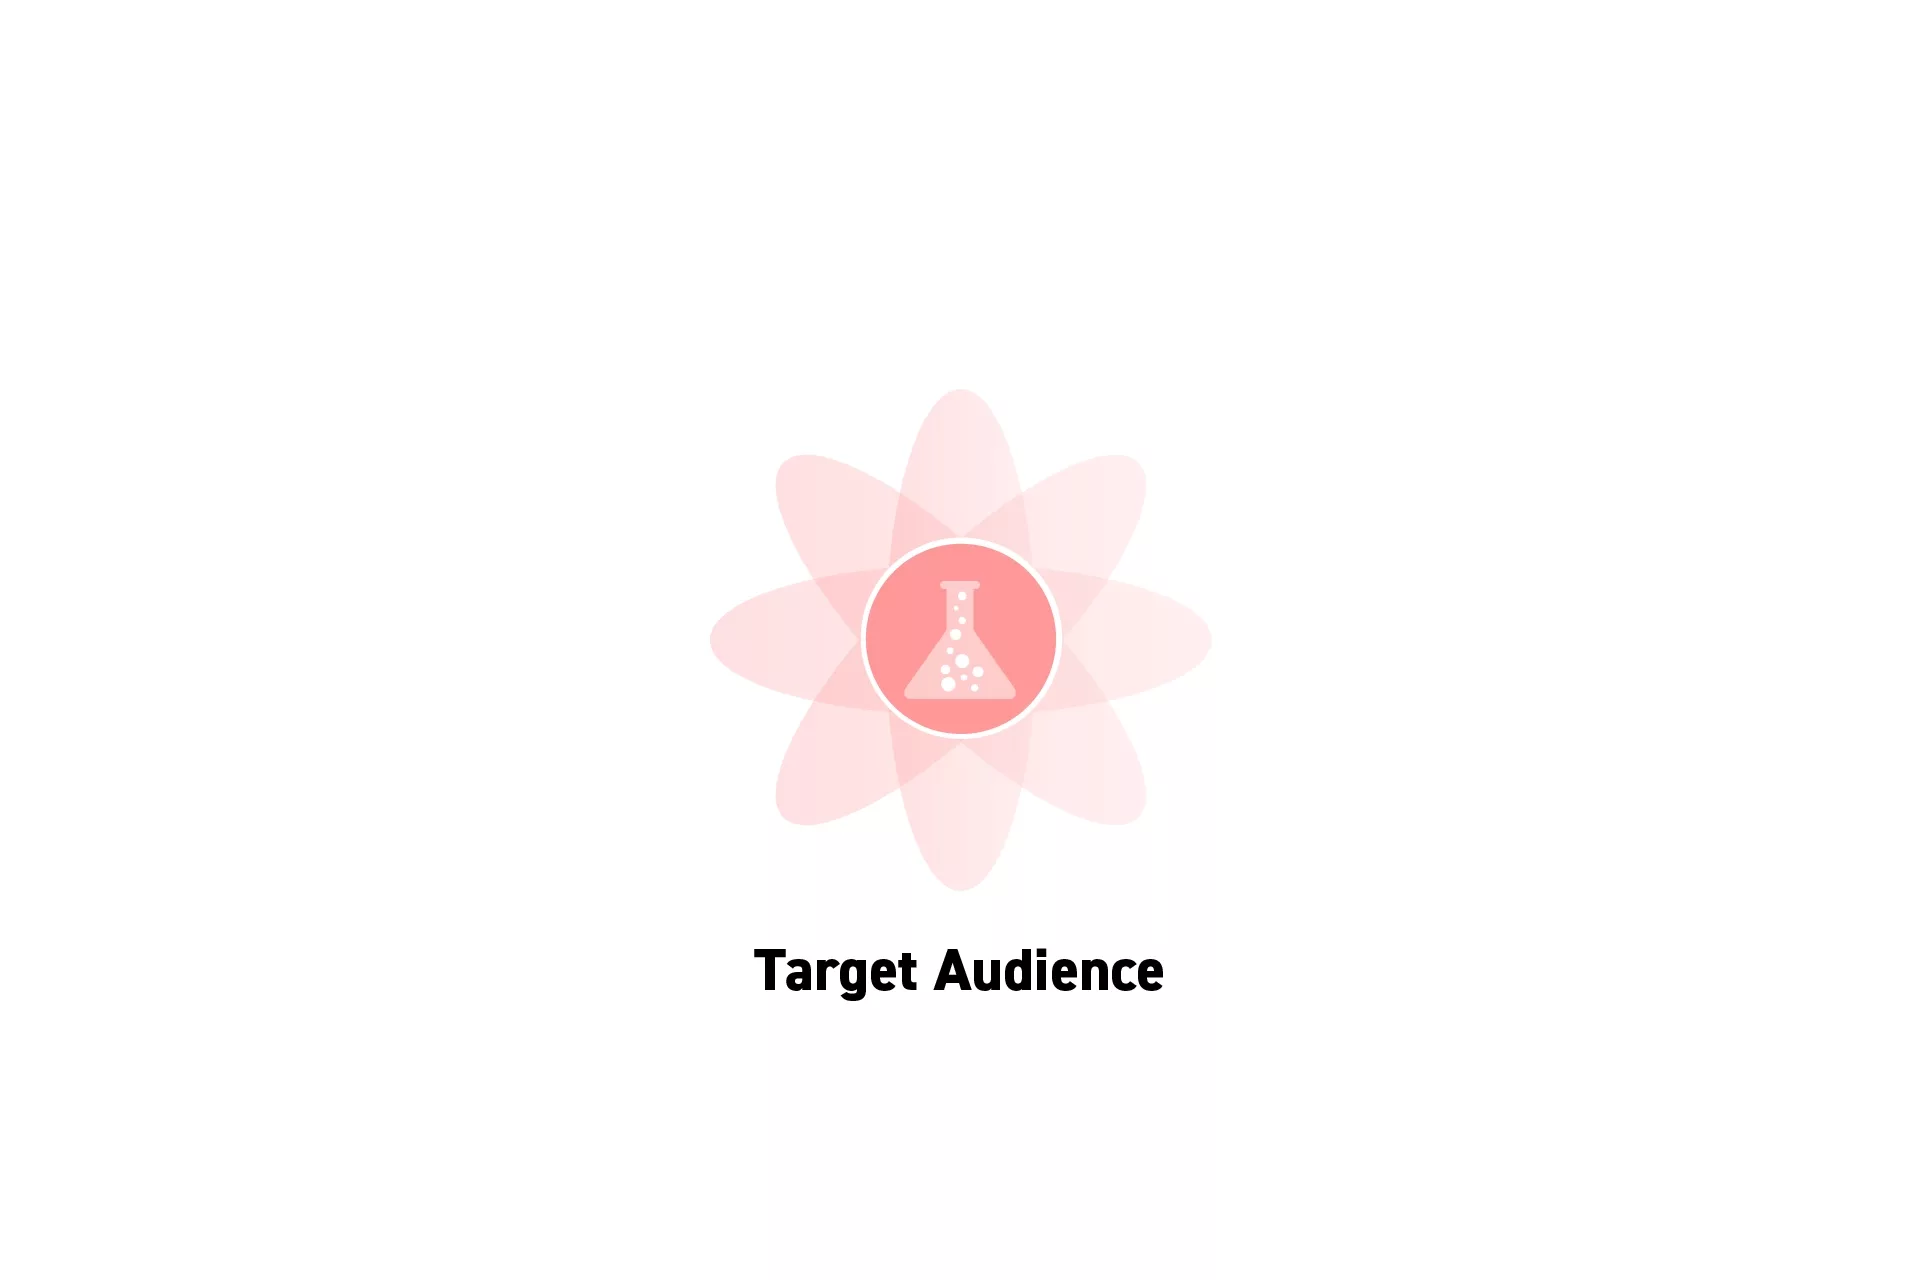 A flower that represents Strategy with the text “Target Audience” beneath it.